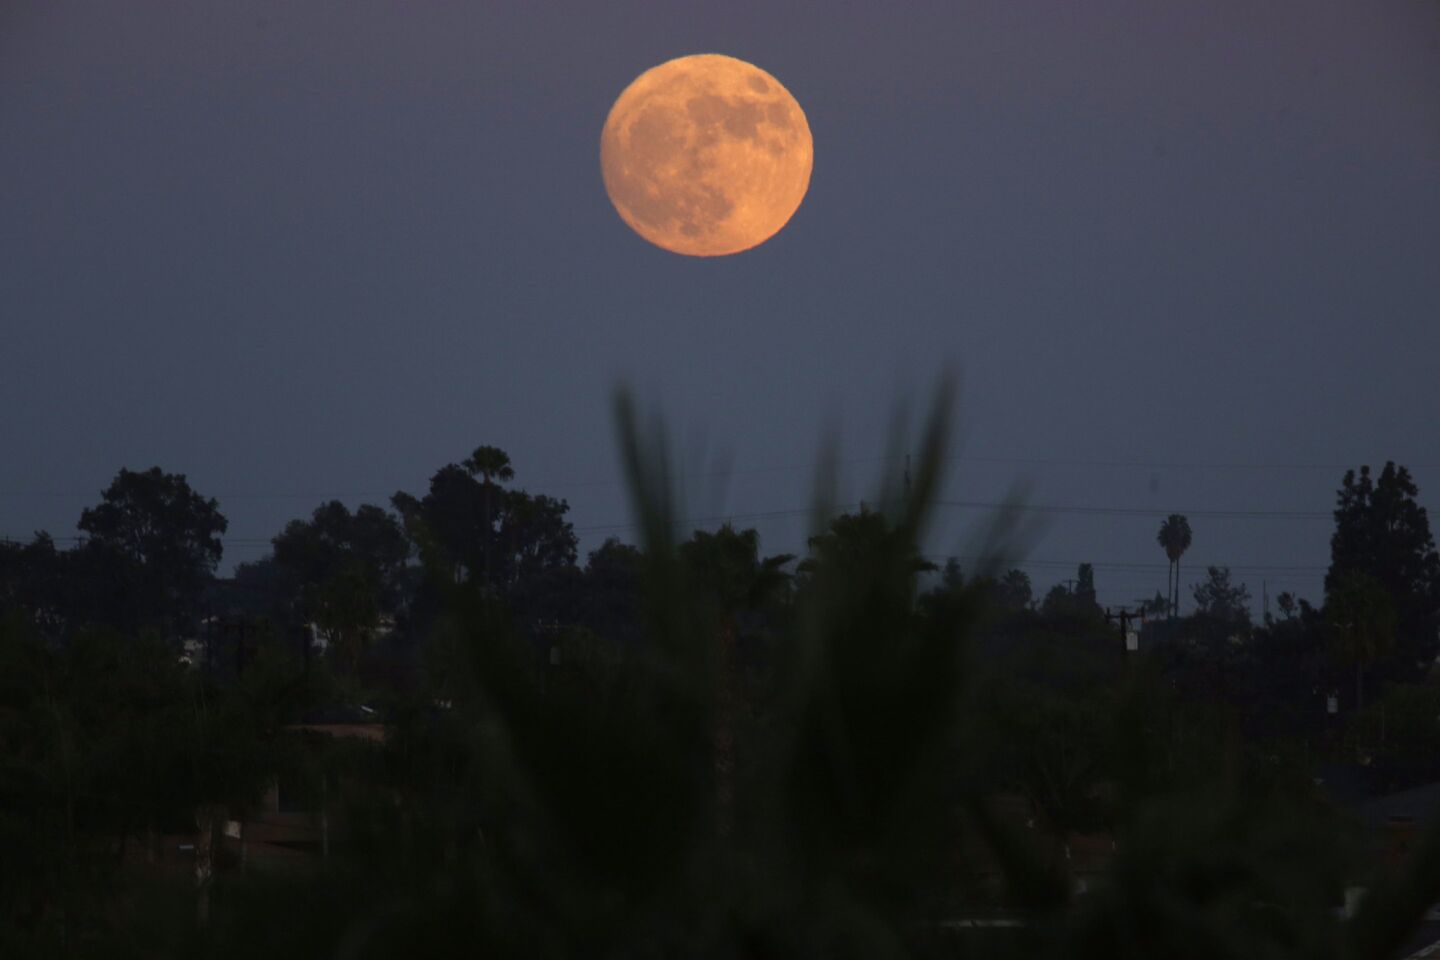 An extra-super super moon rises over El Segundo early Sunday evening. Tonight’s full moon appears bigger and brighter in the night sky than it has in nearly 70 years.